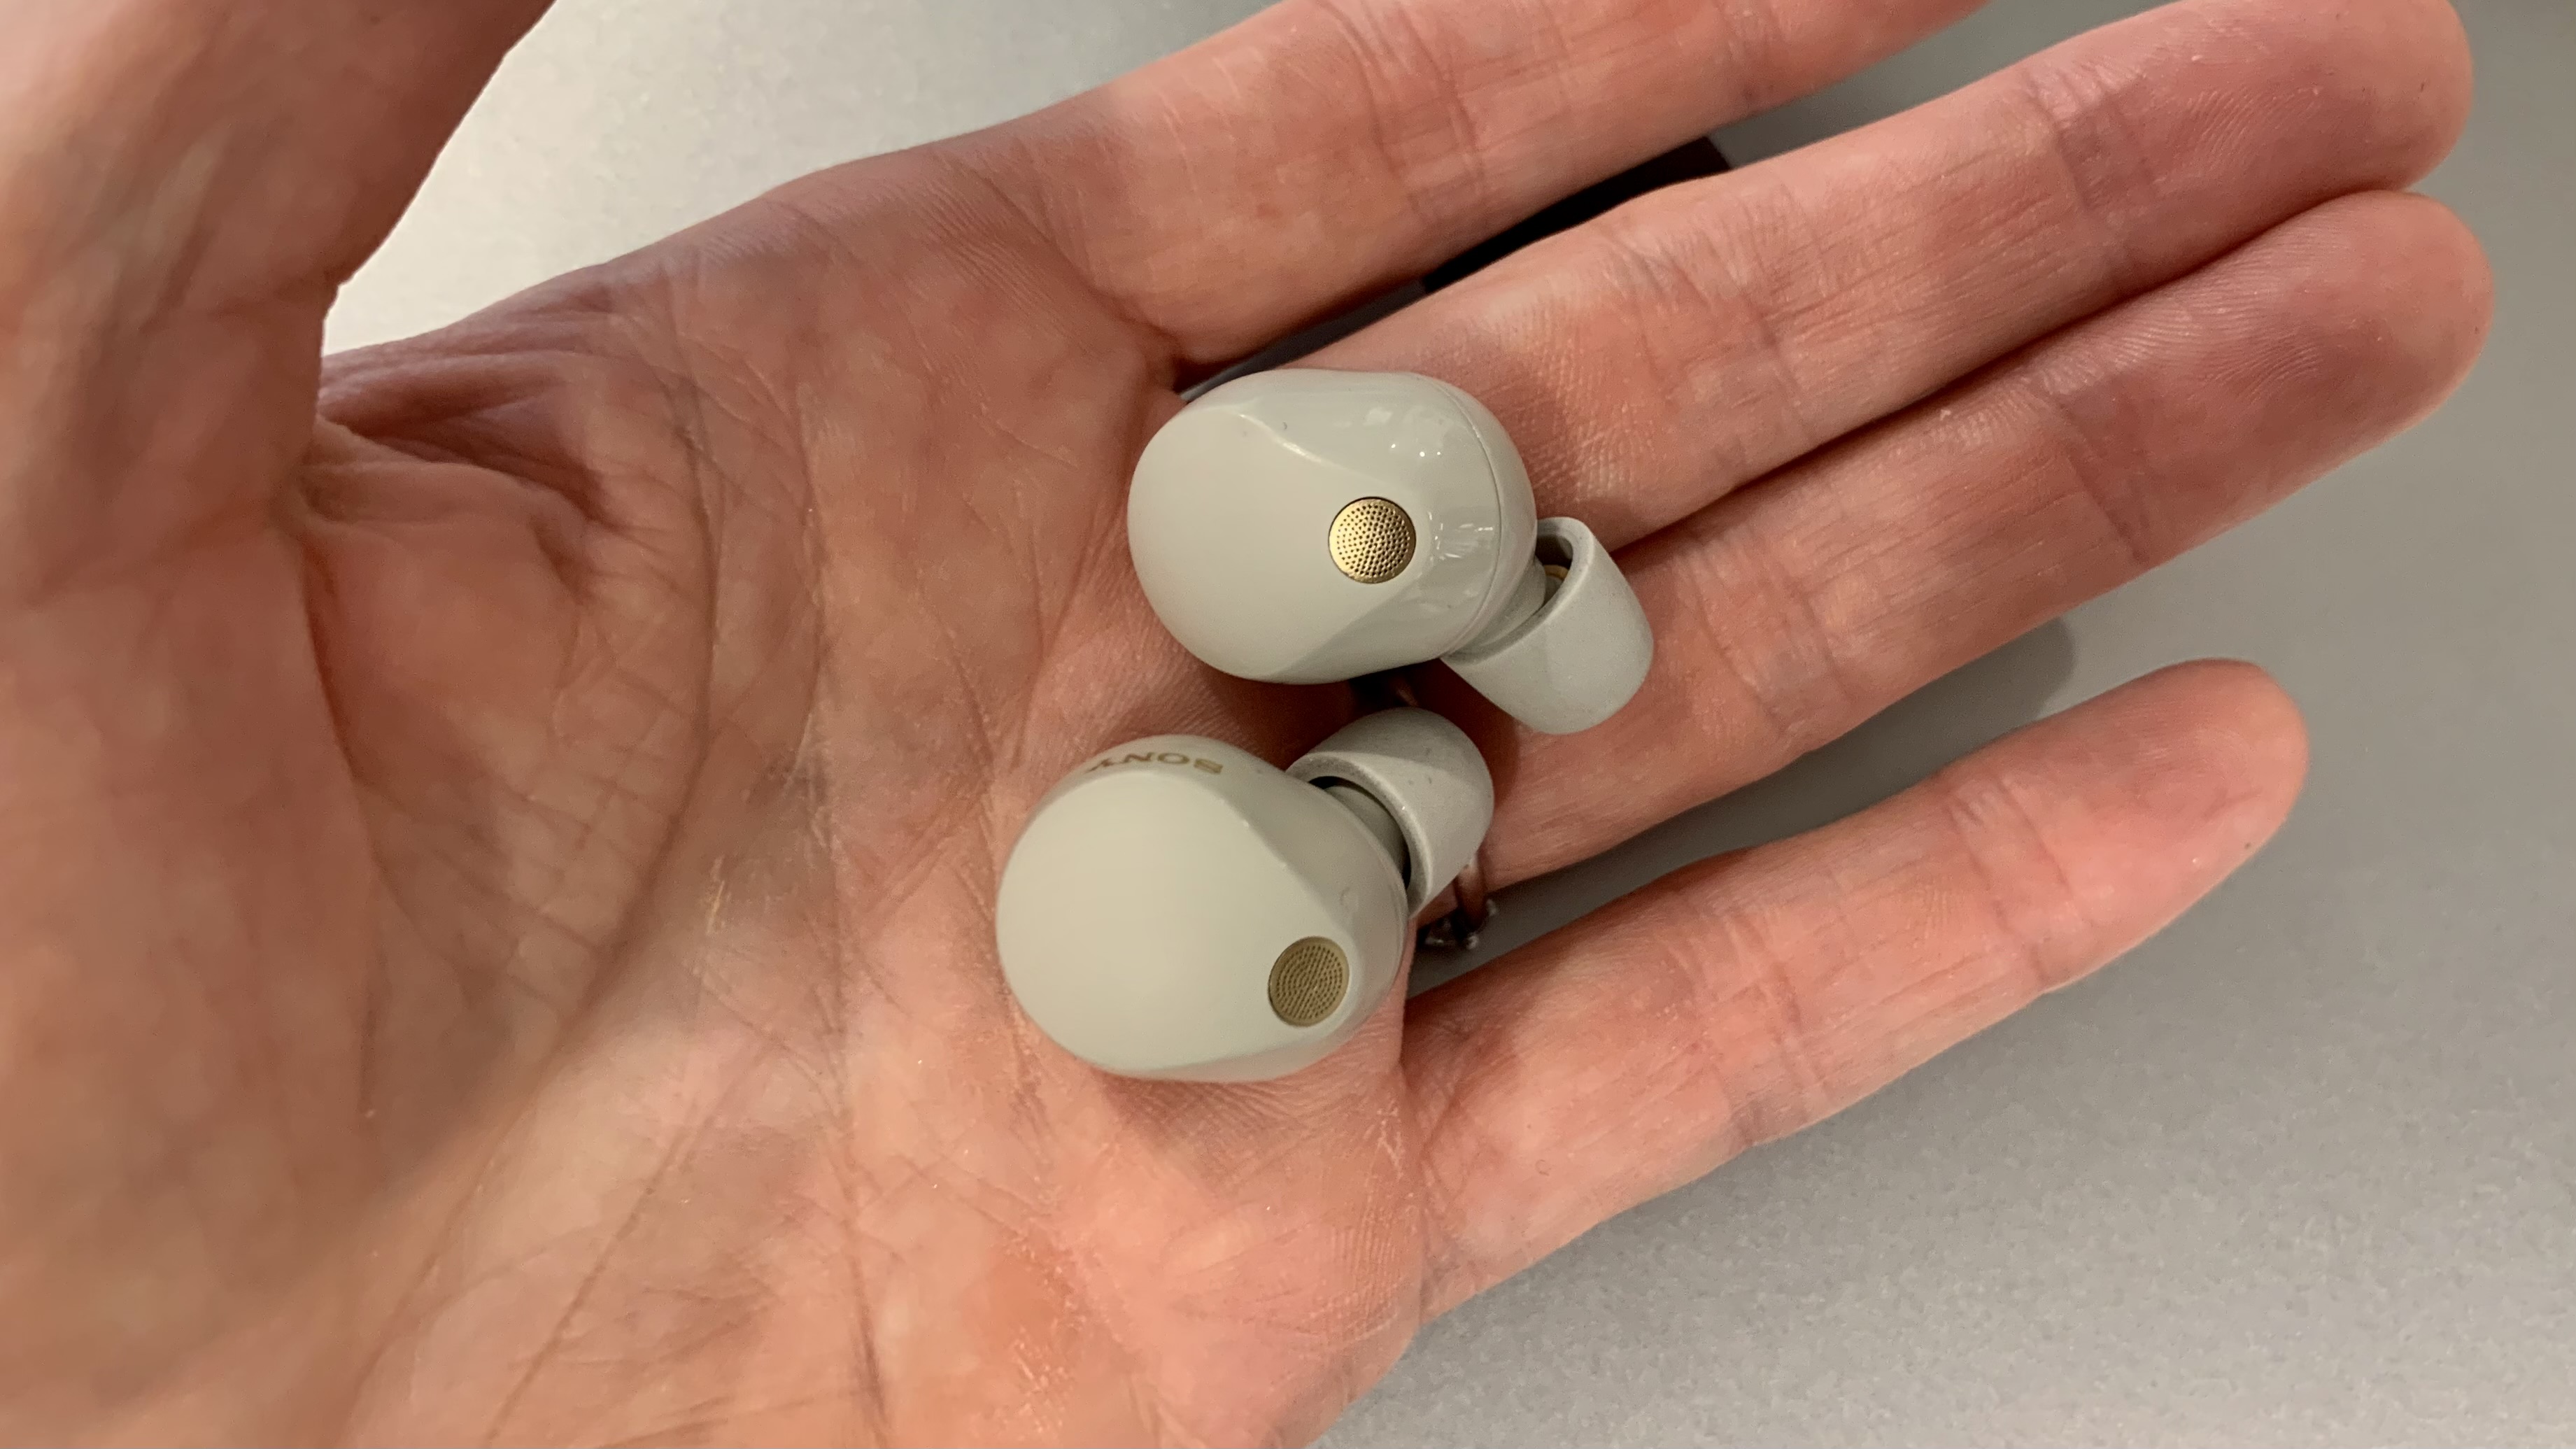 Sony WF-1000XM5 earbuds in the palm of a hand